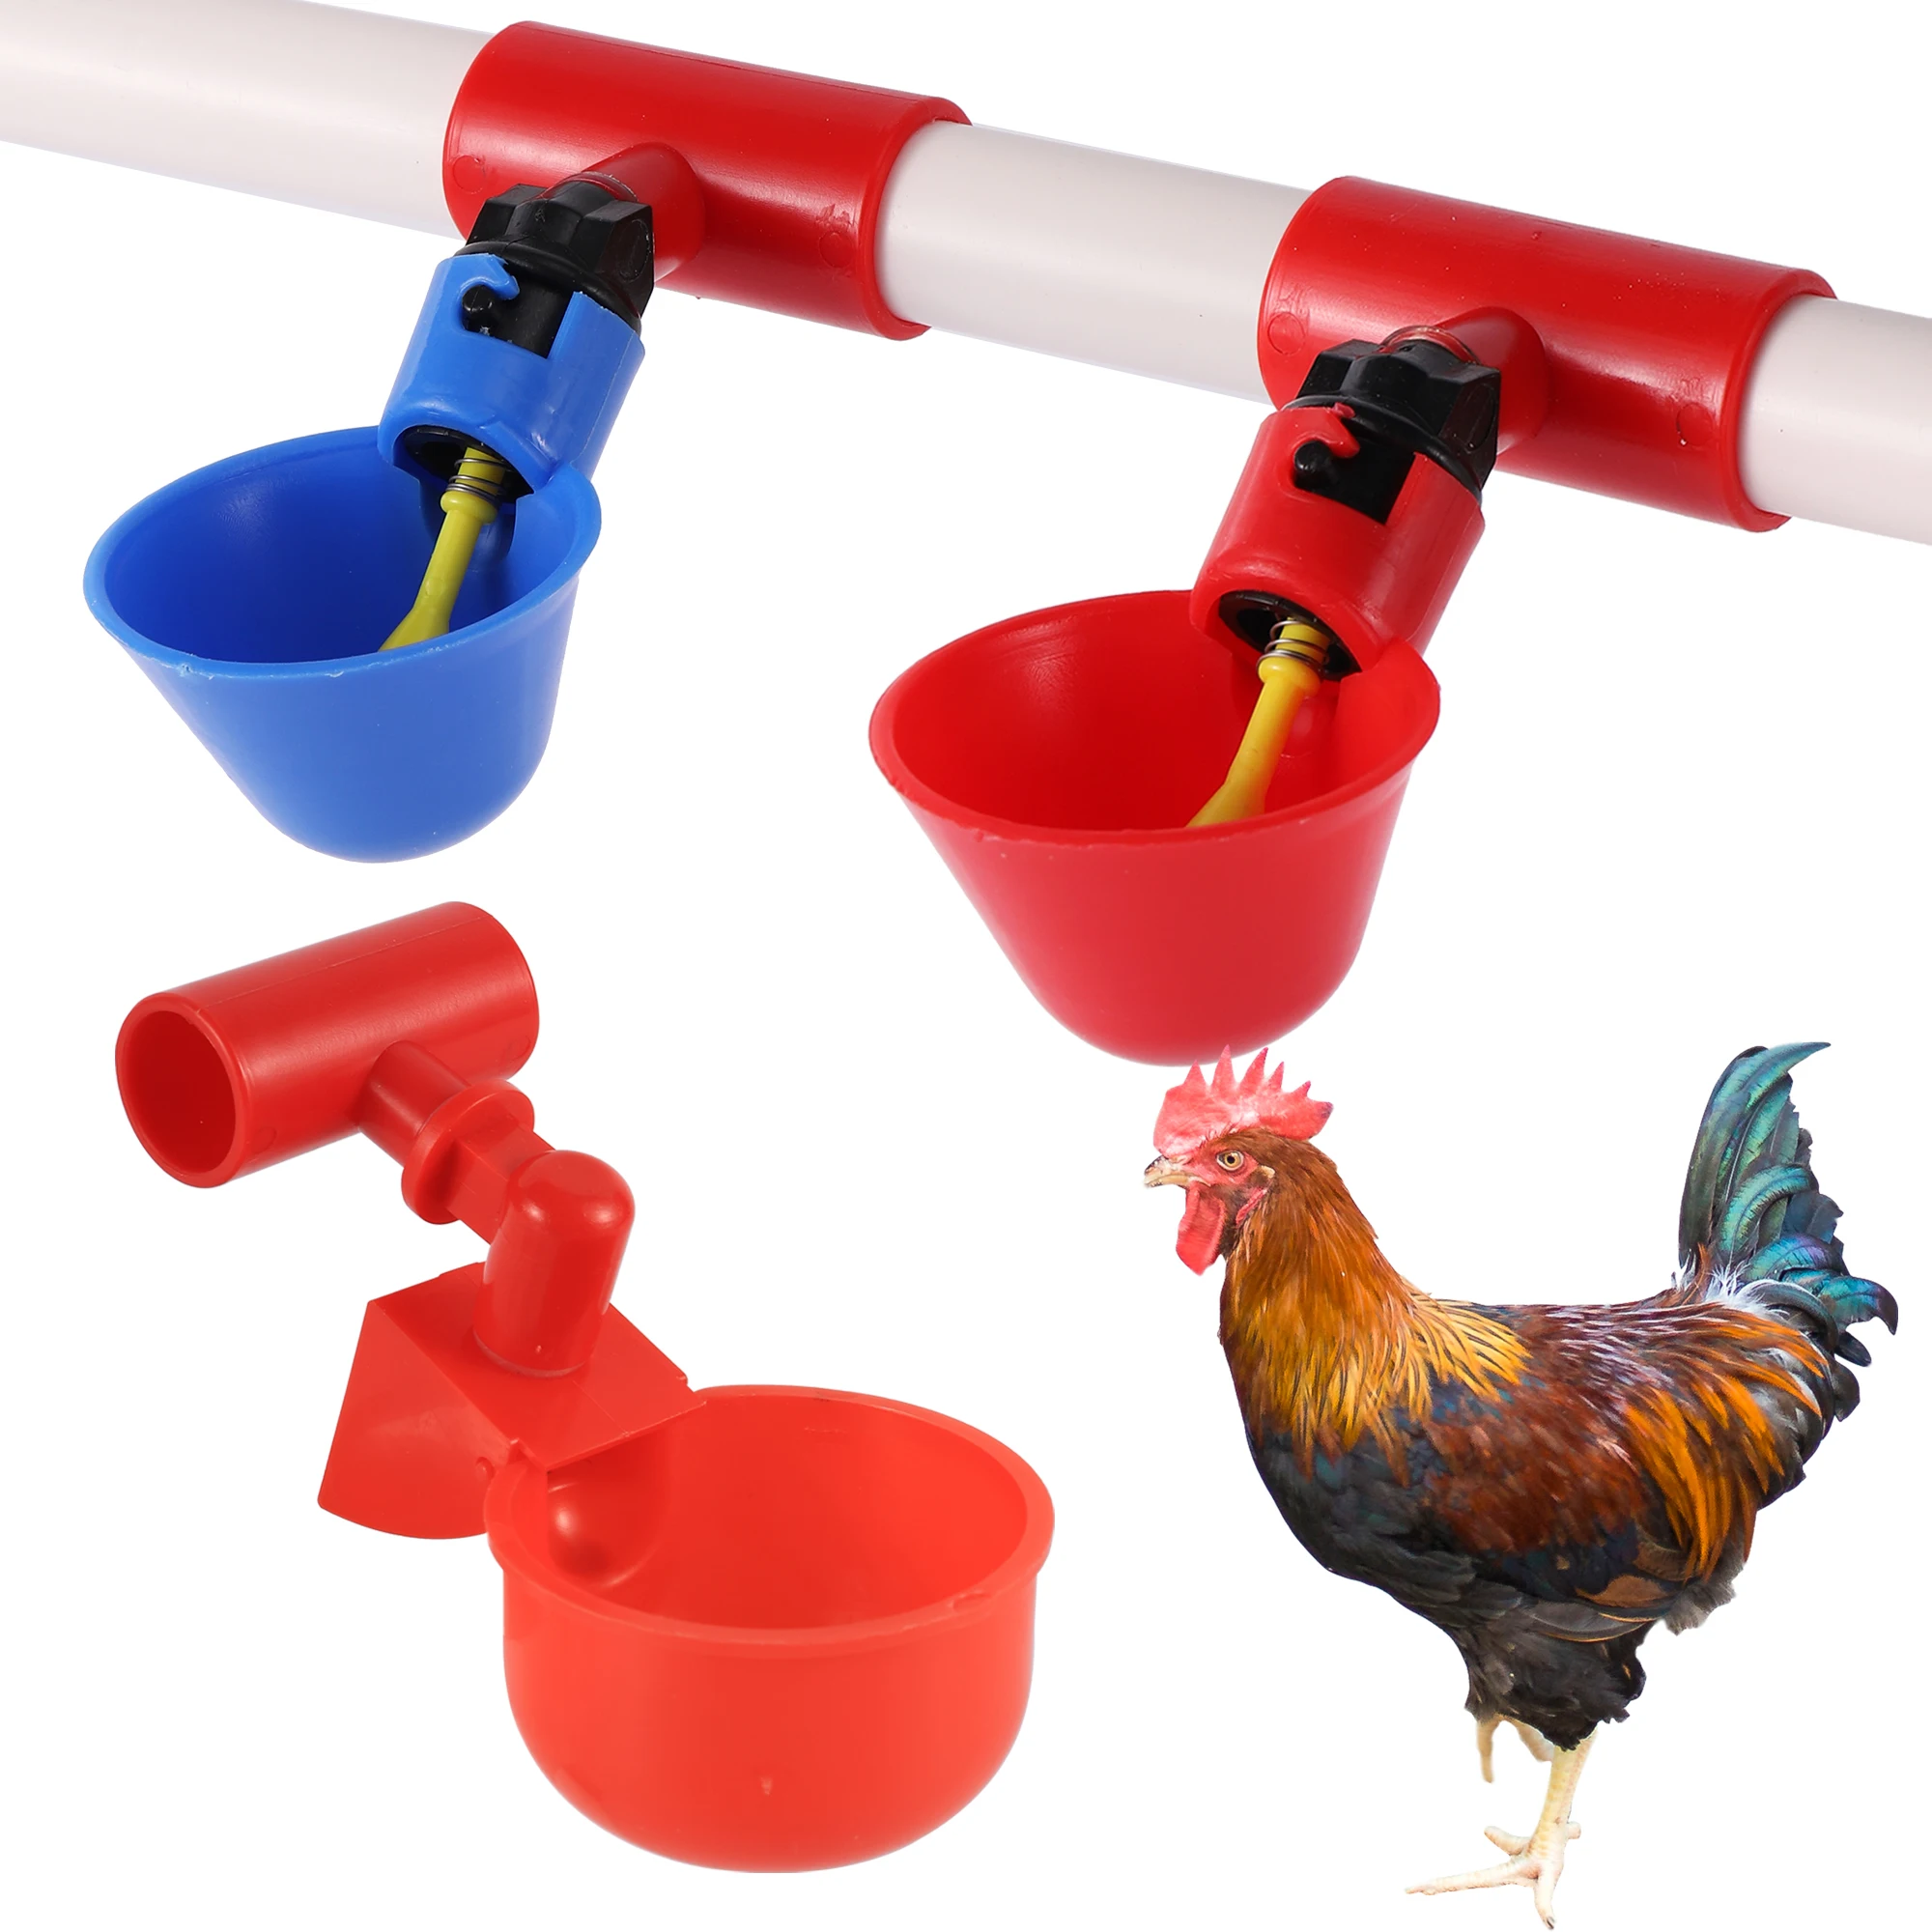 

5 Pcs Chicken Water Cup Automatic Drinker for Chickens Thread Filling Waterer Poultry Drinking Bowl for Chickens Quail Bird Cage